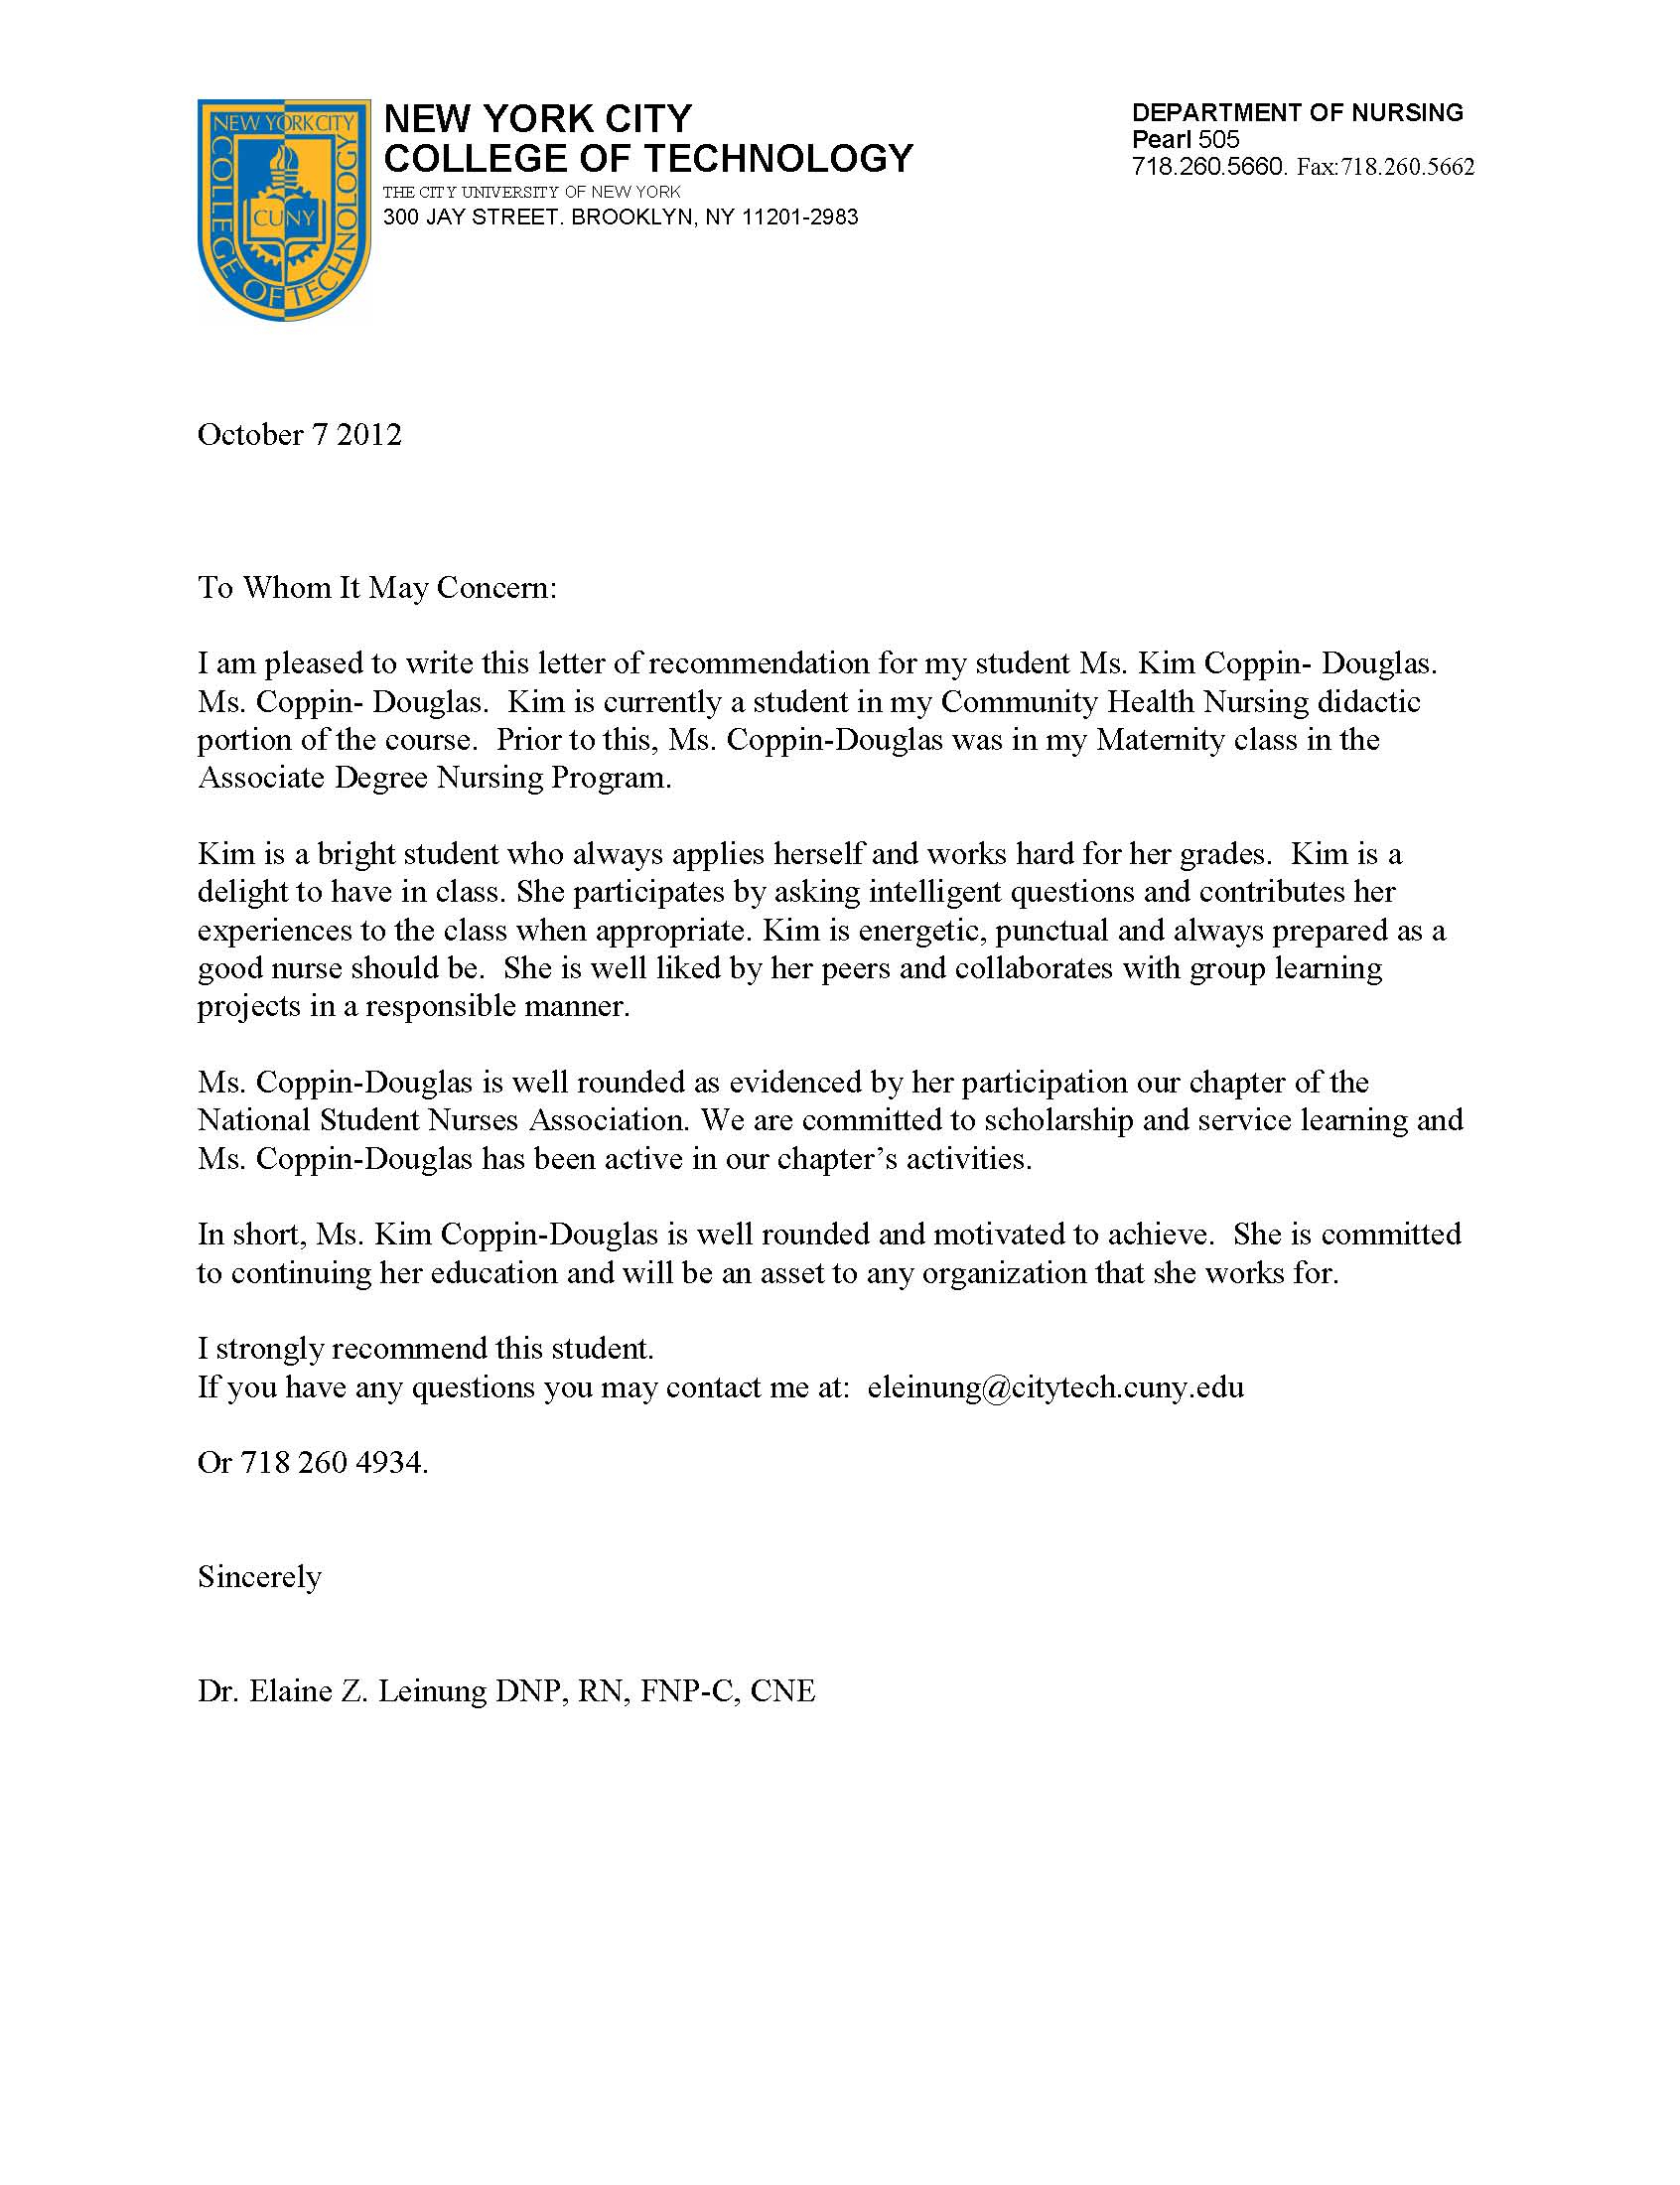 New York Medical College Letter Of Recommendation Akali with regard to dimensions 1692 X 2200